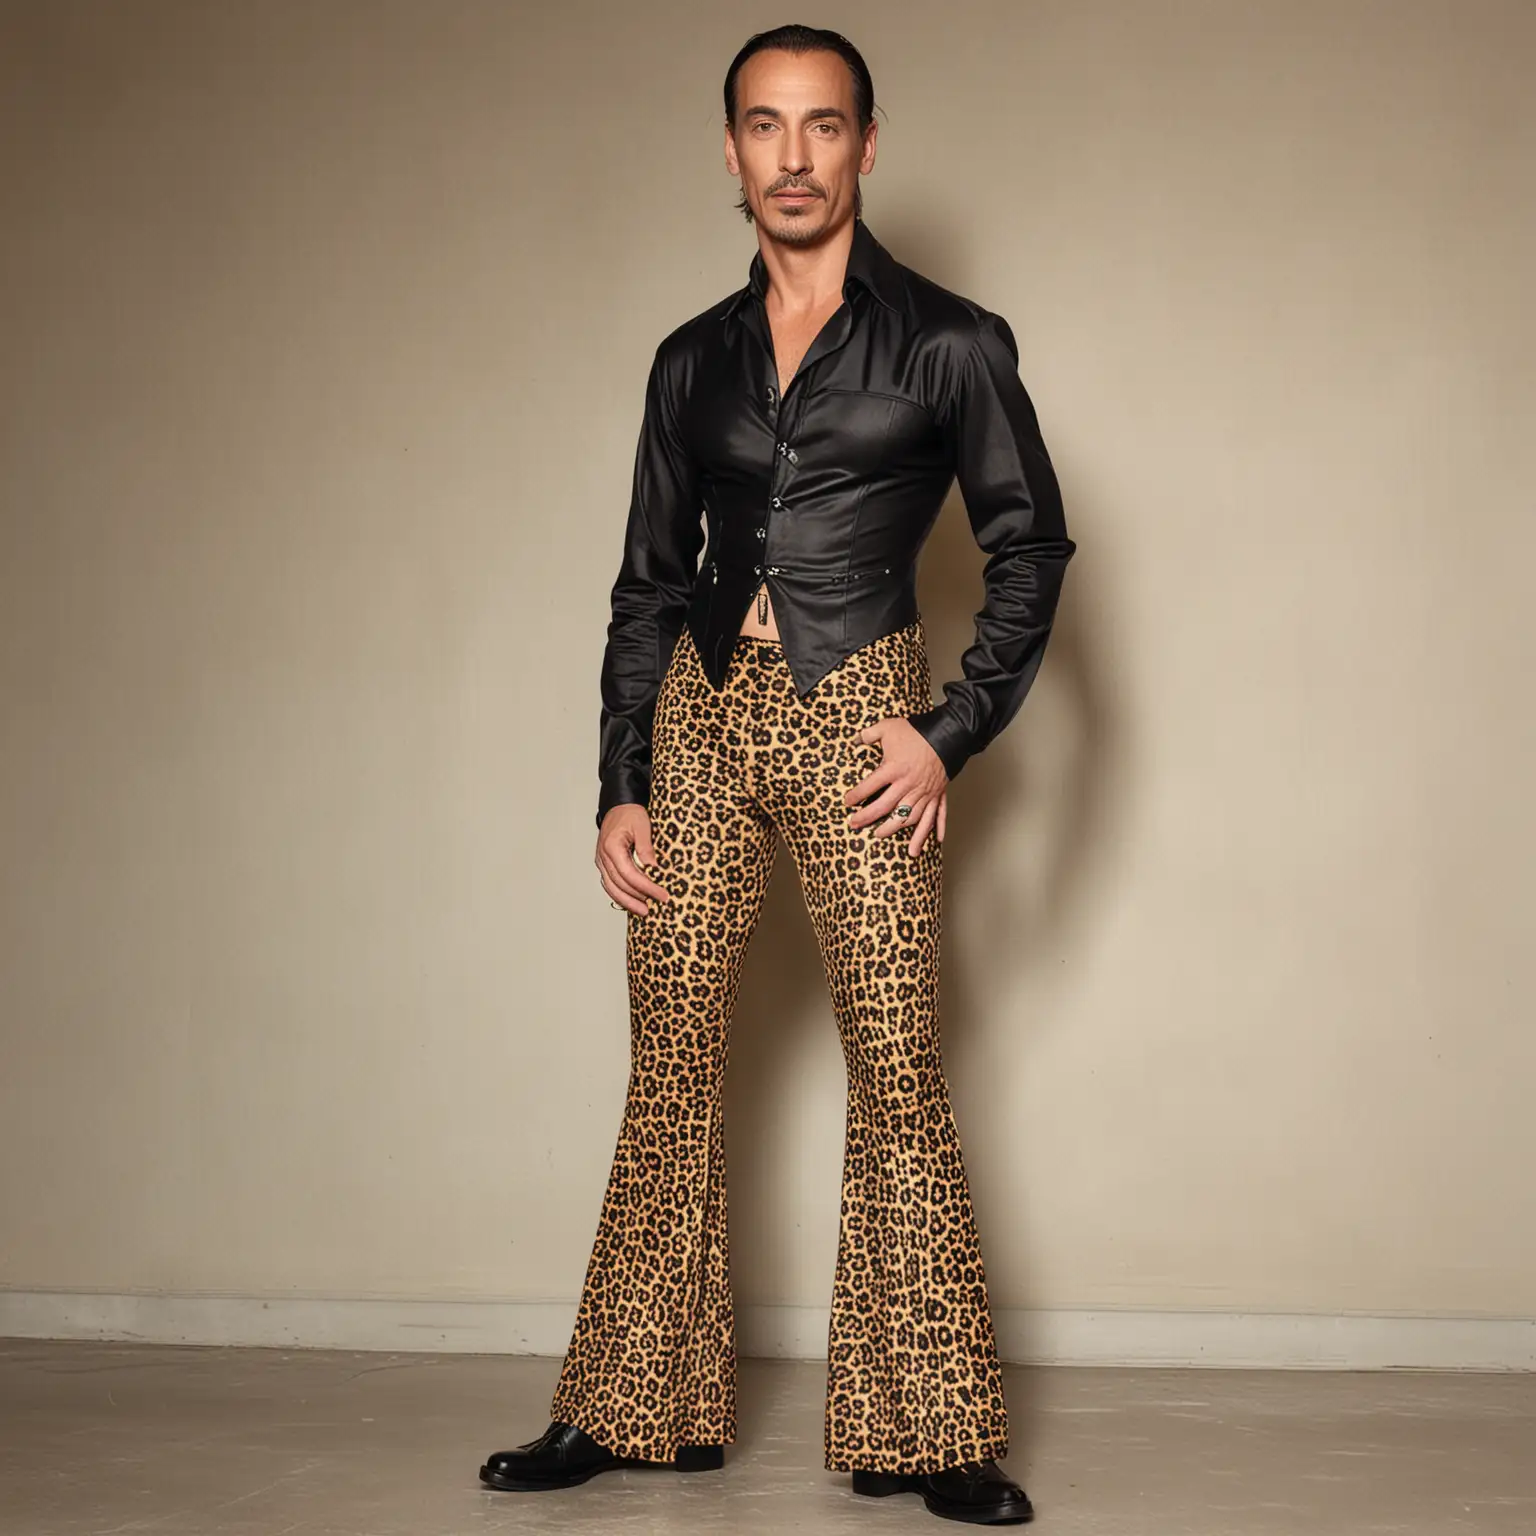 Fashionable Leopard Print Bell Bottom Pants with Corseted Man in Artisanal Style Inspired by John Galliano and Tom of Finland